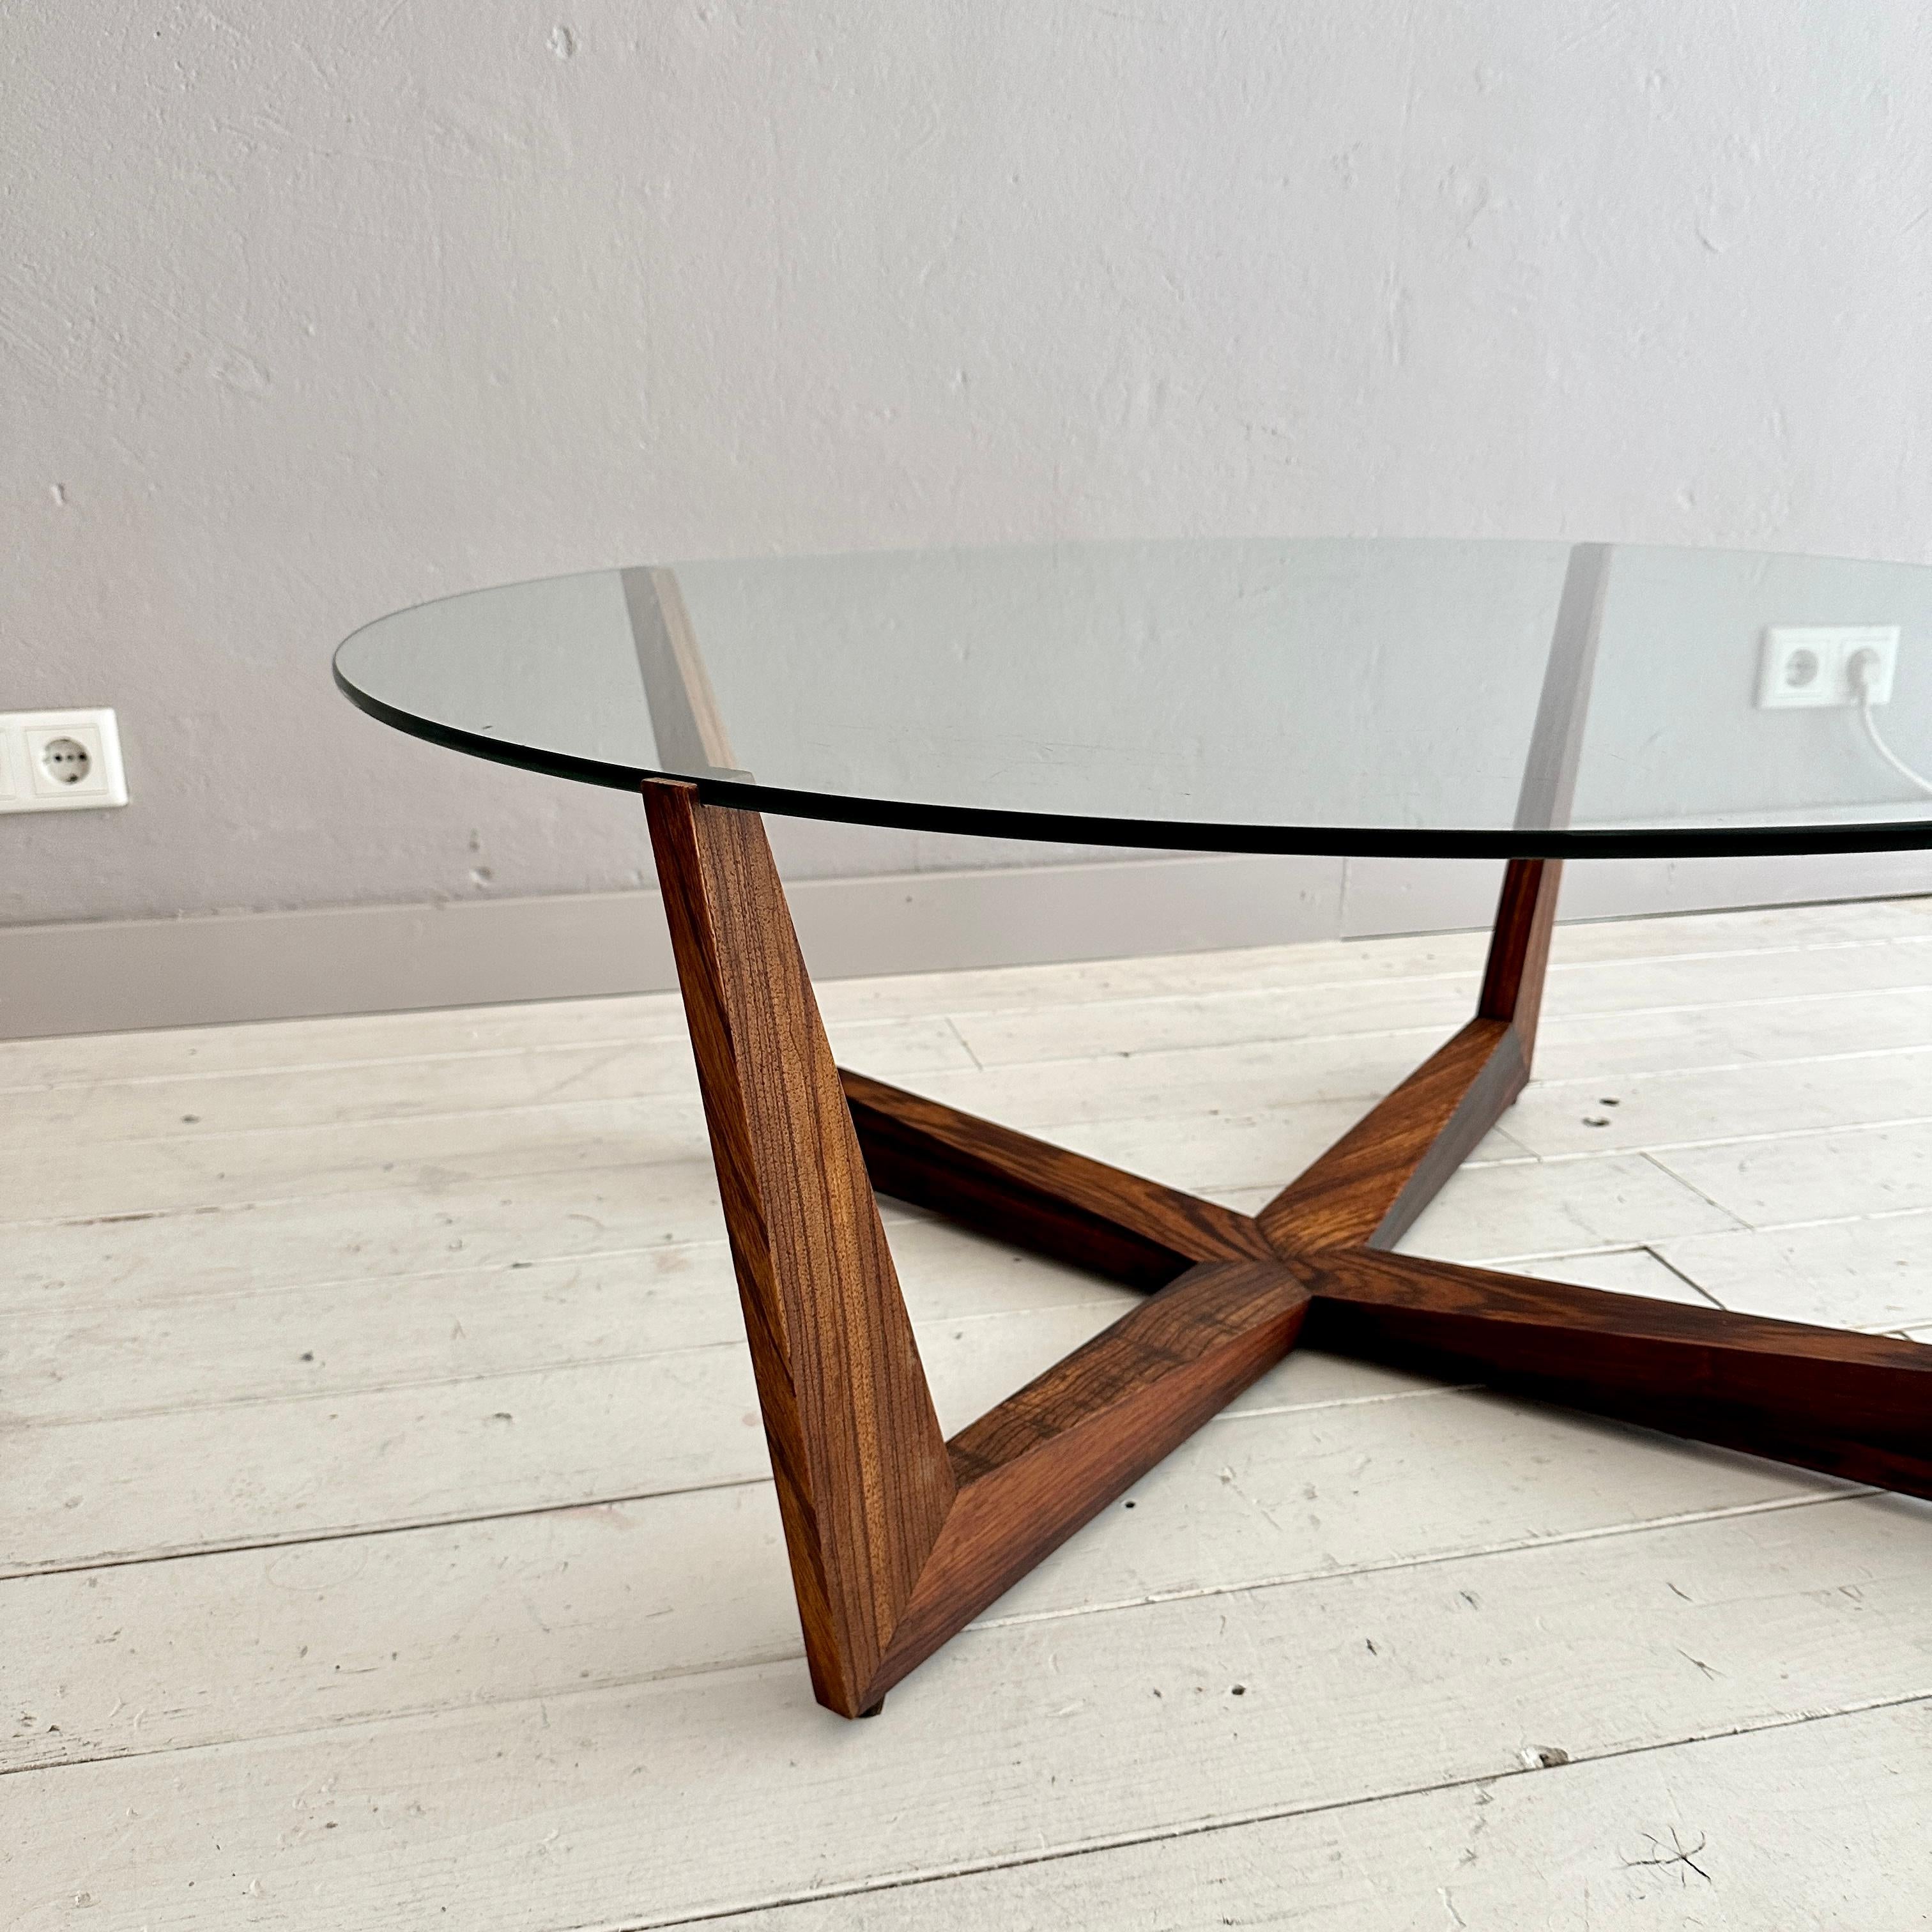 This rare Round Coffee Table by Wilhelm Renz was made out of Teak and Glass around 1960.
A unique piece which is a great eye-catcher for your antique, modern, space age or mid-century interior.
If you have any more questions we are very happy to